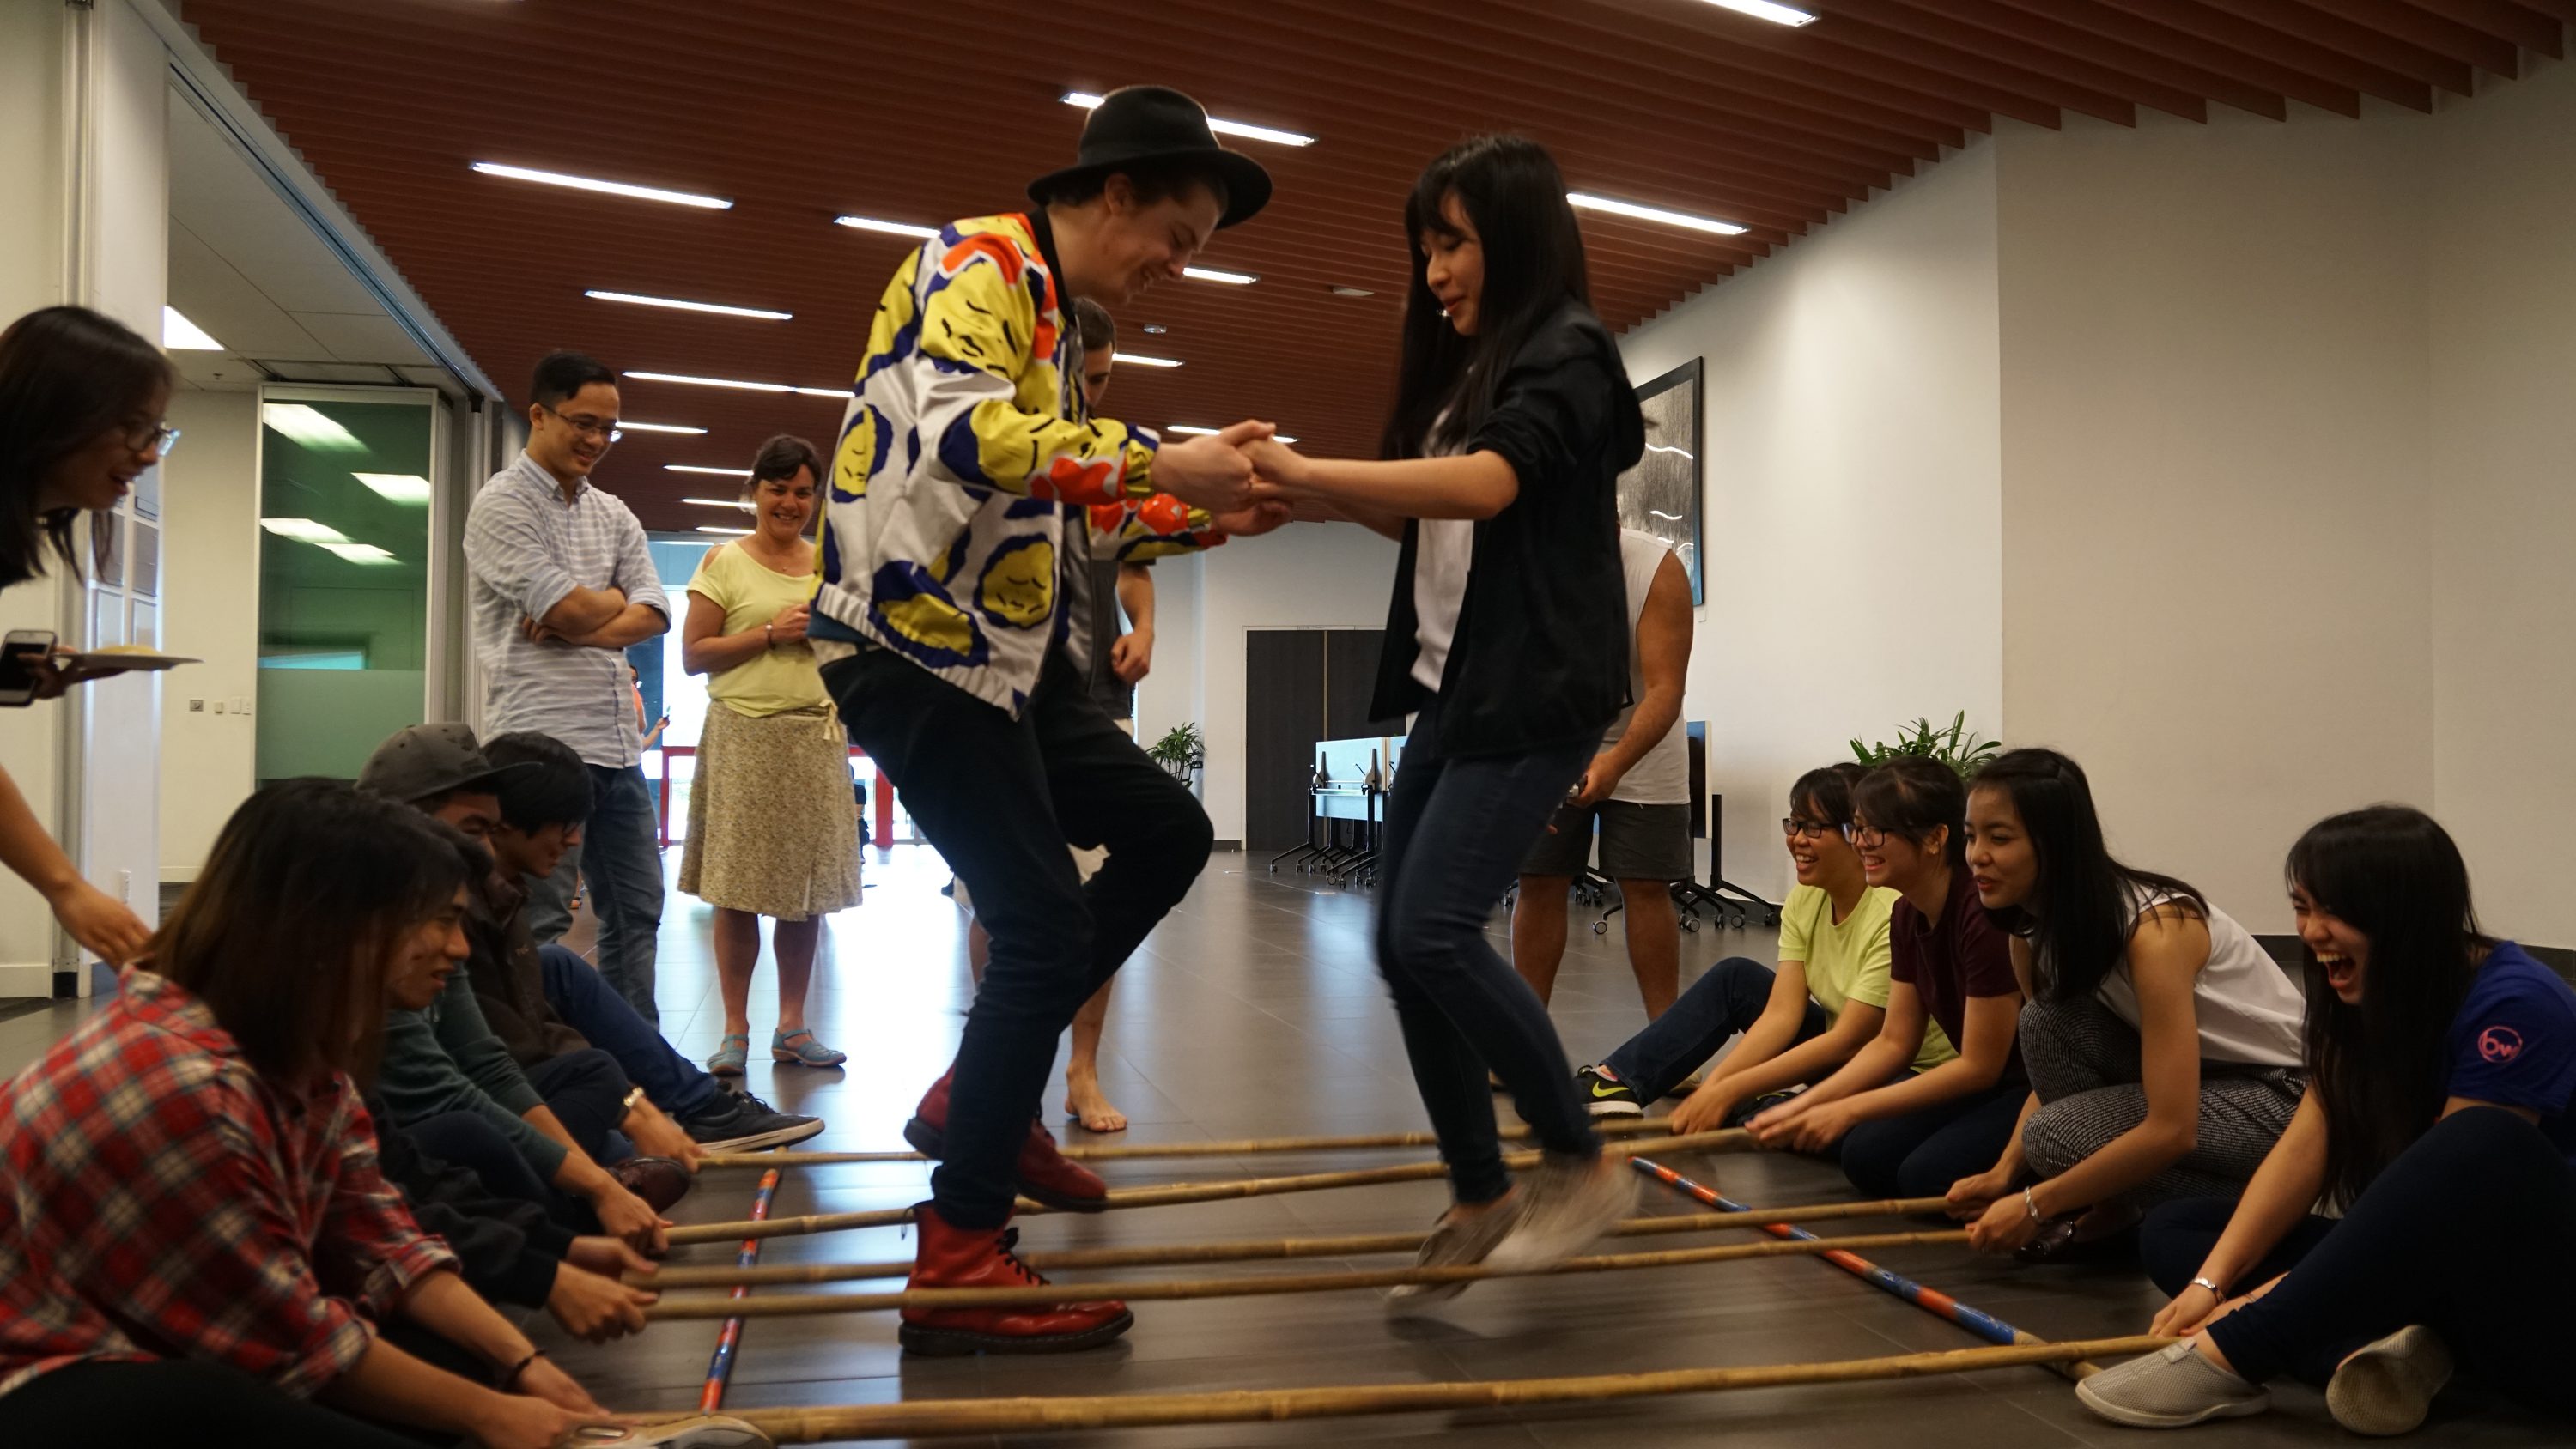 An RMIT Vietnam student demonstrated the bamboo dance which originated from the northwest highlands of Vietnam and is performed during special celebrations like Tet (Lunar New Year).